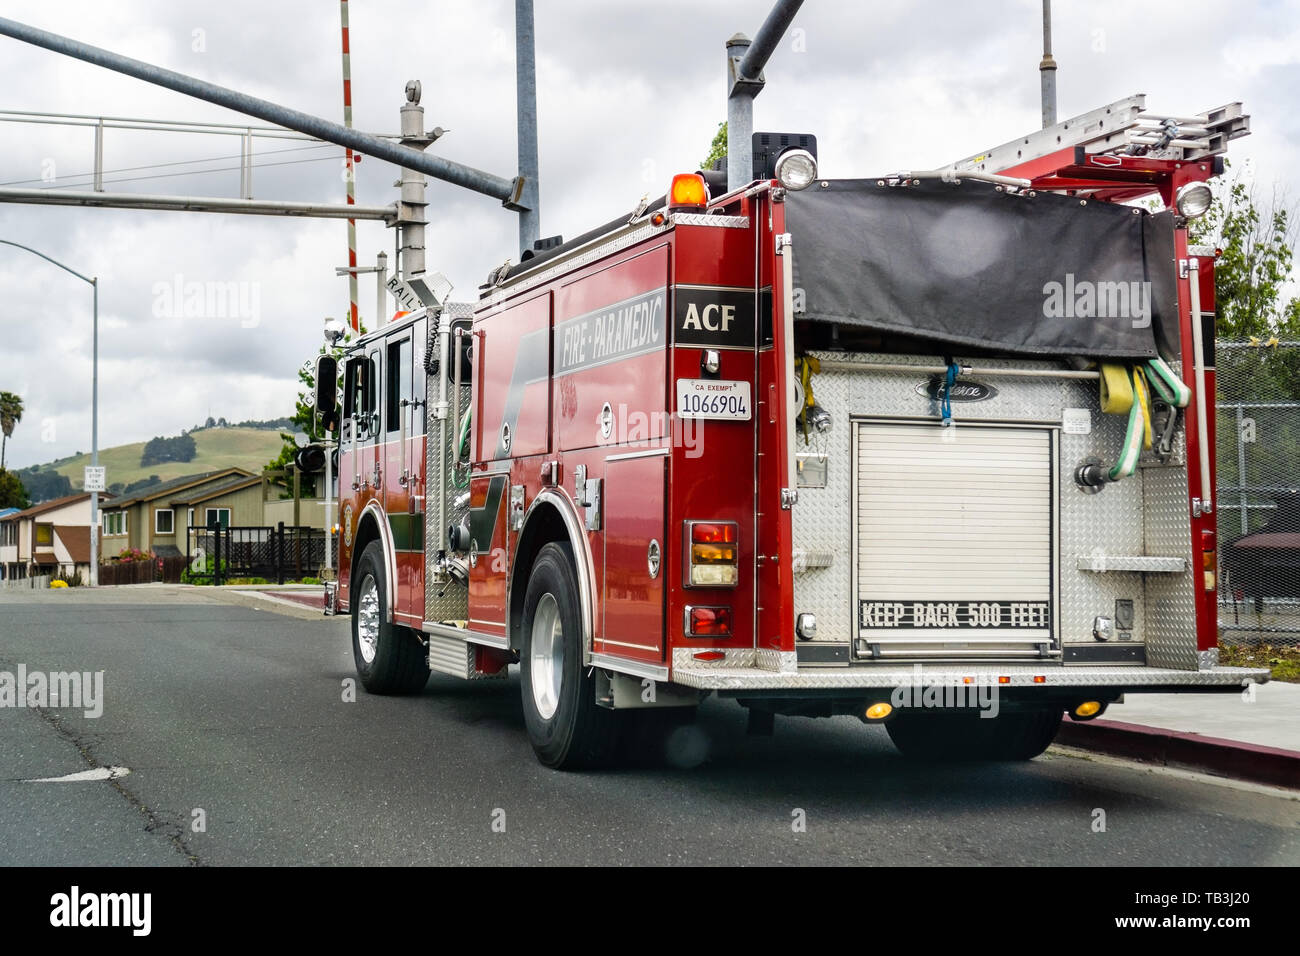 May 26, 2019 Hayward / CA / USA - Alameda County Fire Truck stopped on the side of a street Stock Photo